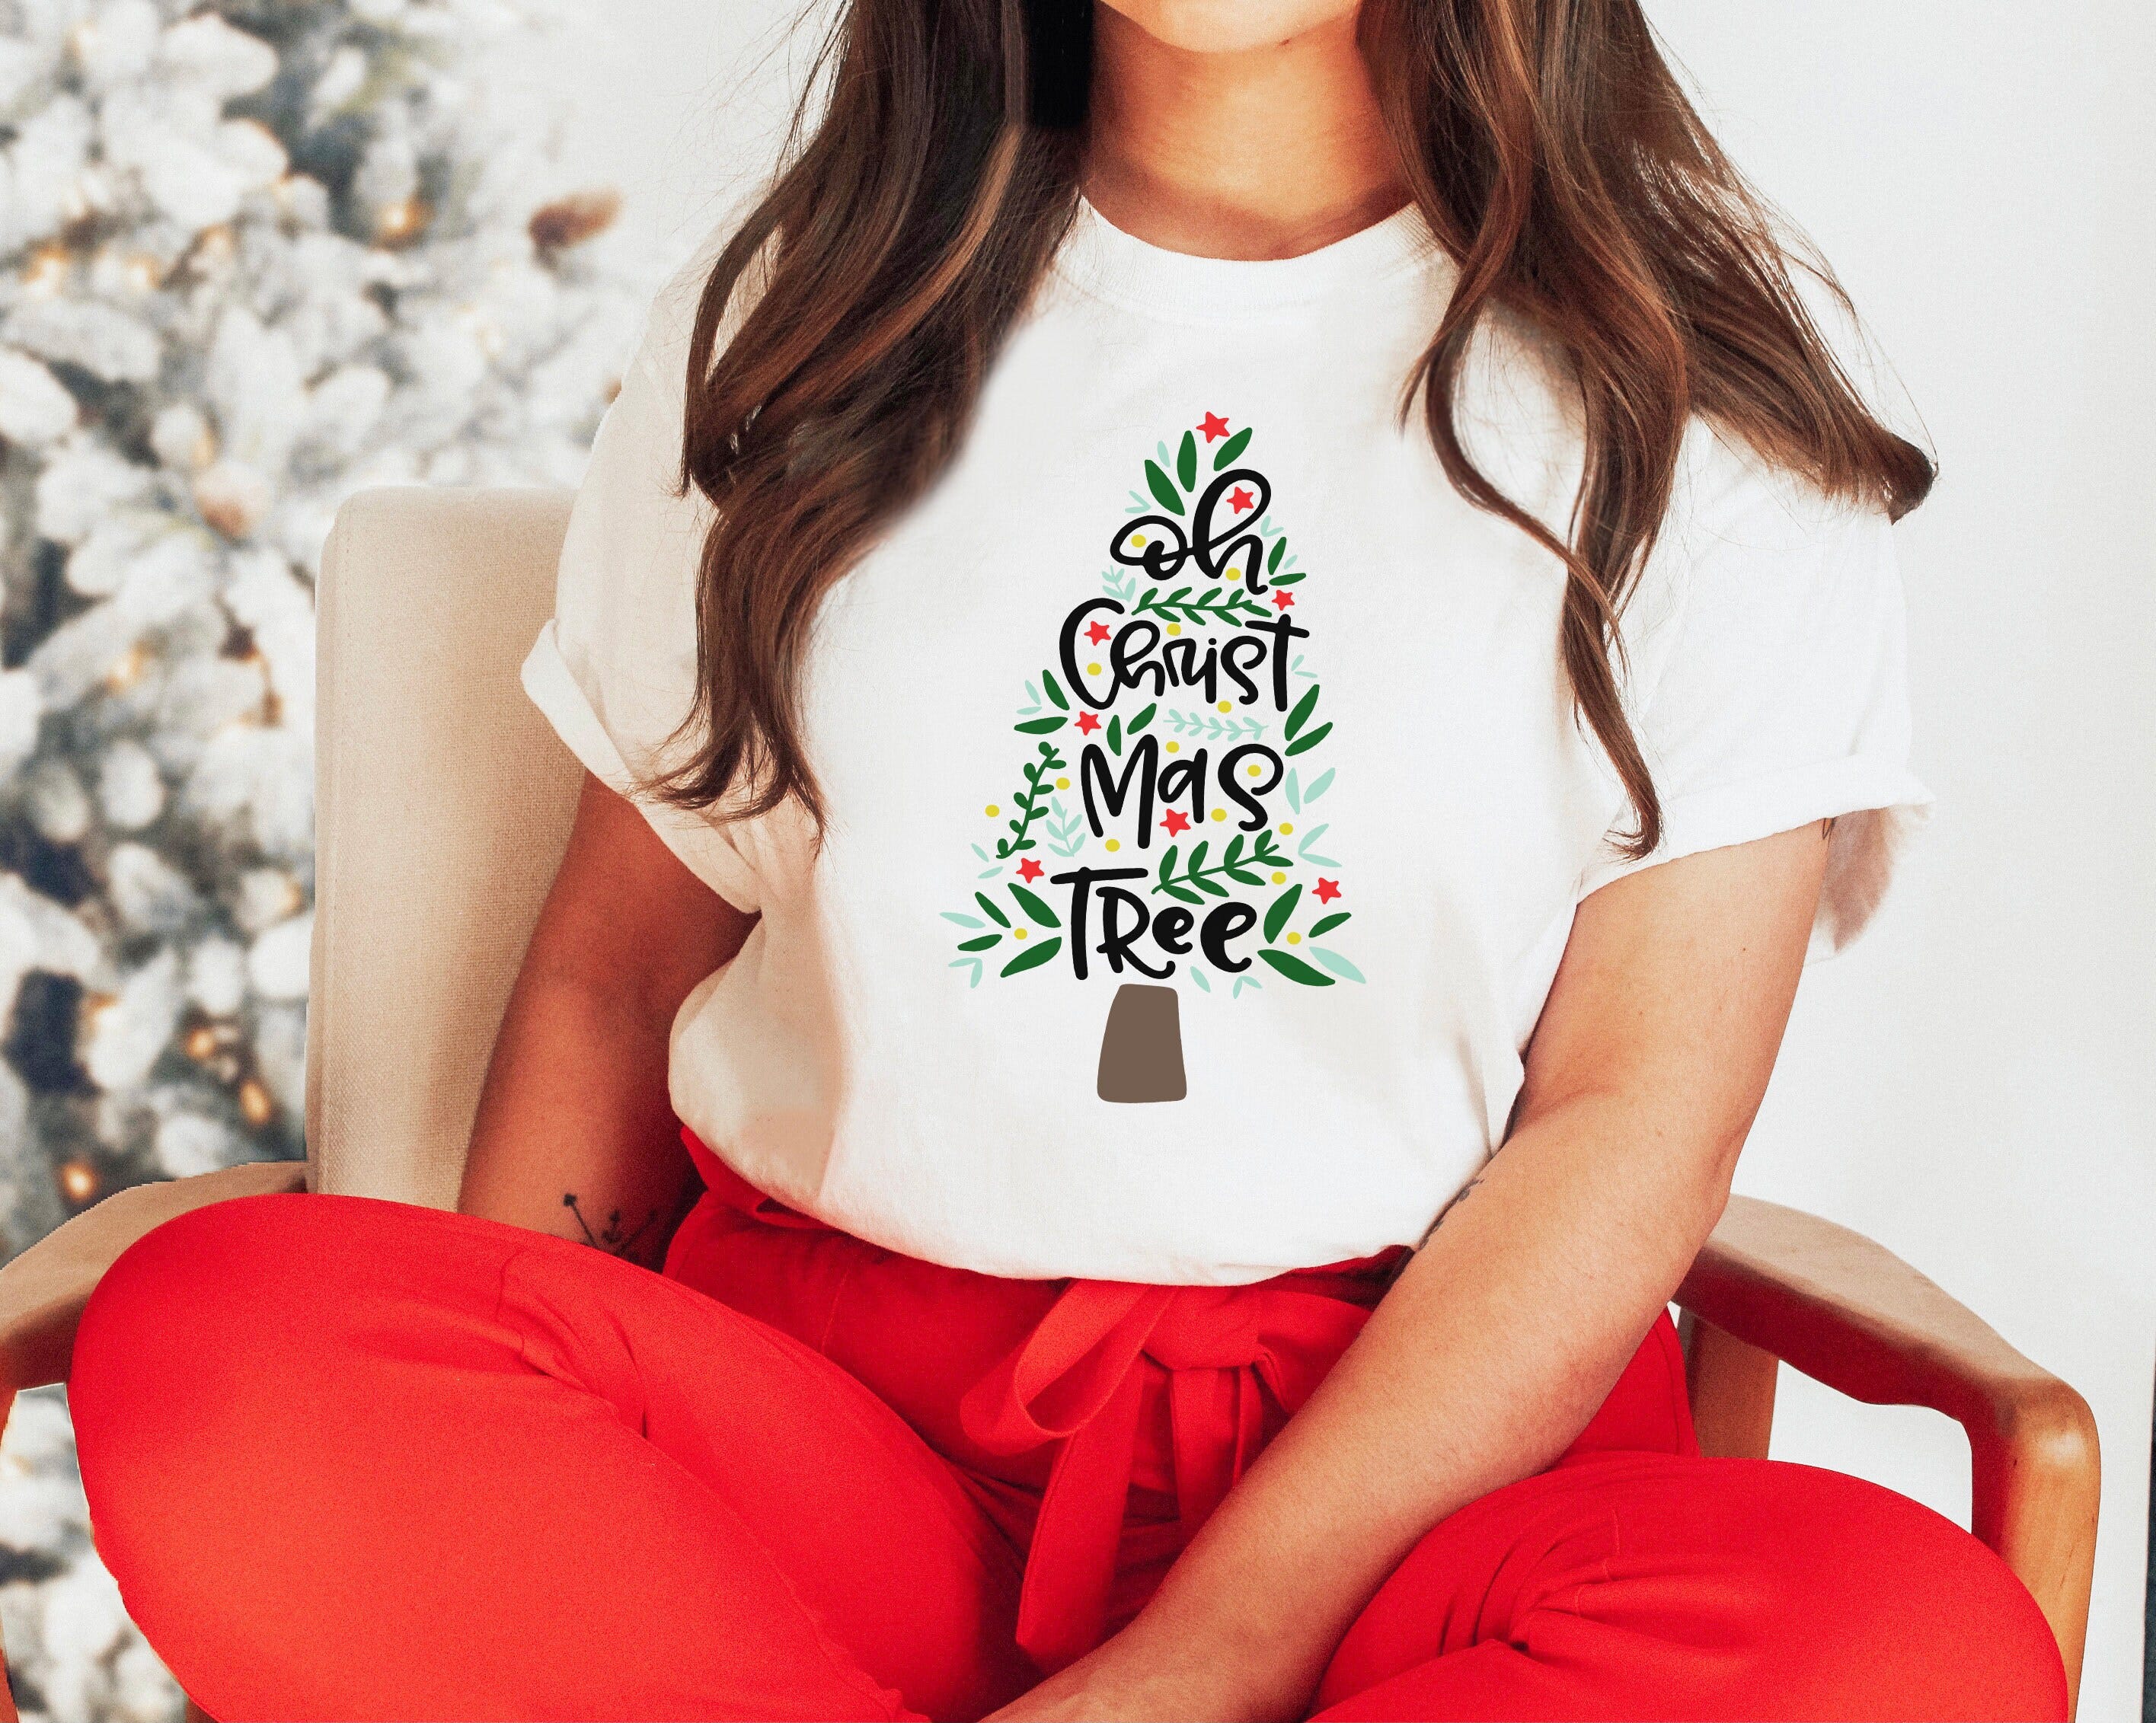 Oh Chistmas Tree Shirt, Christmas Shirts, Family Christmas Shirts, Holiday Shirts Matching Family, Matching Youth Toddler Baby Gifts Festive